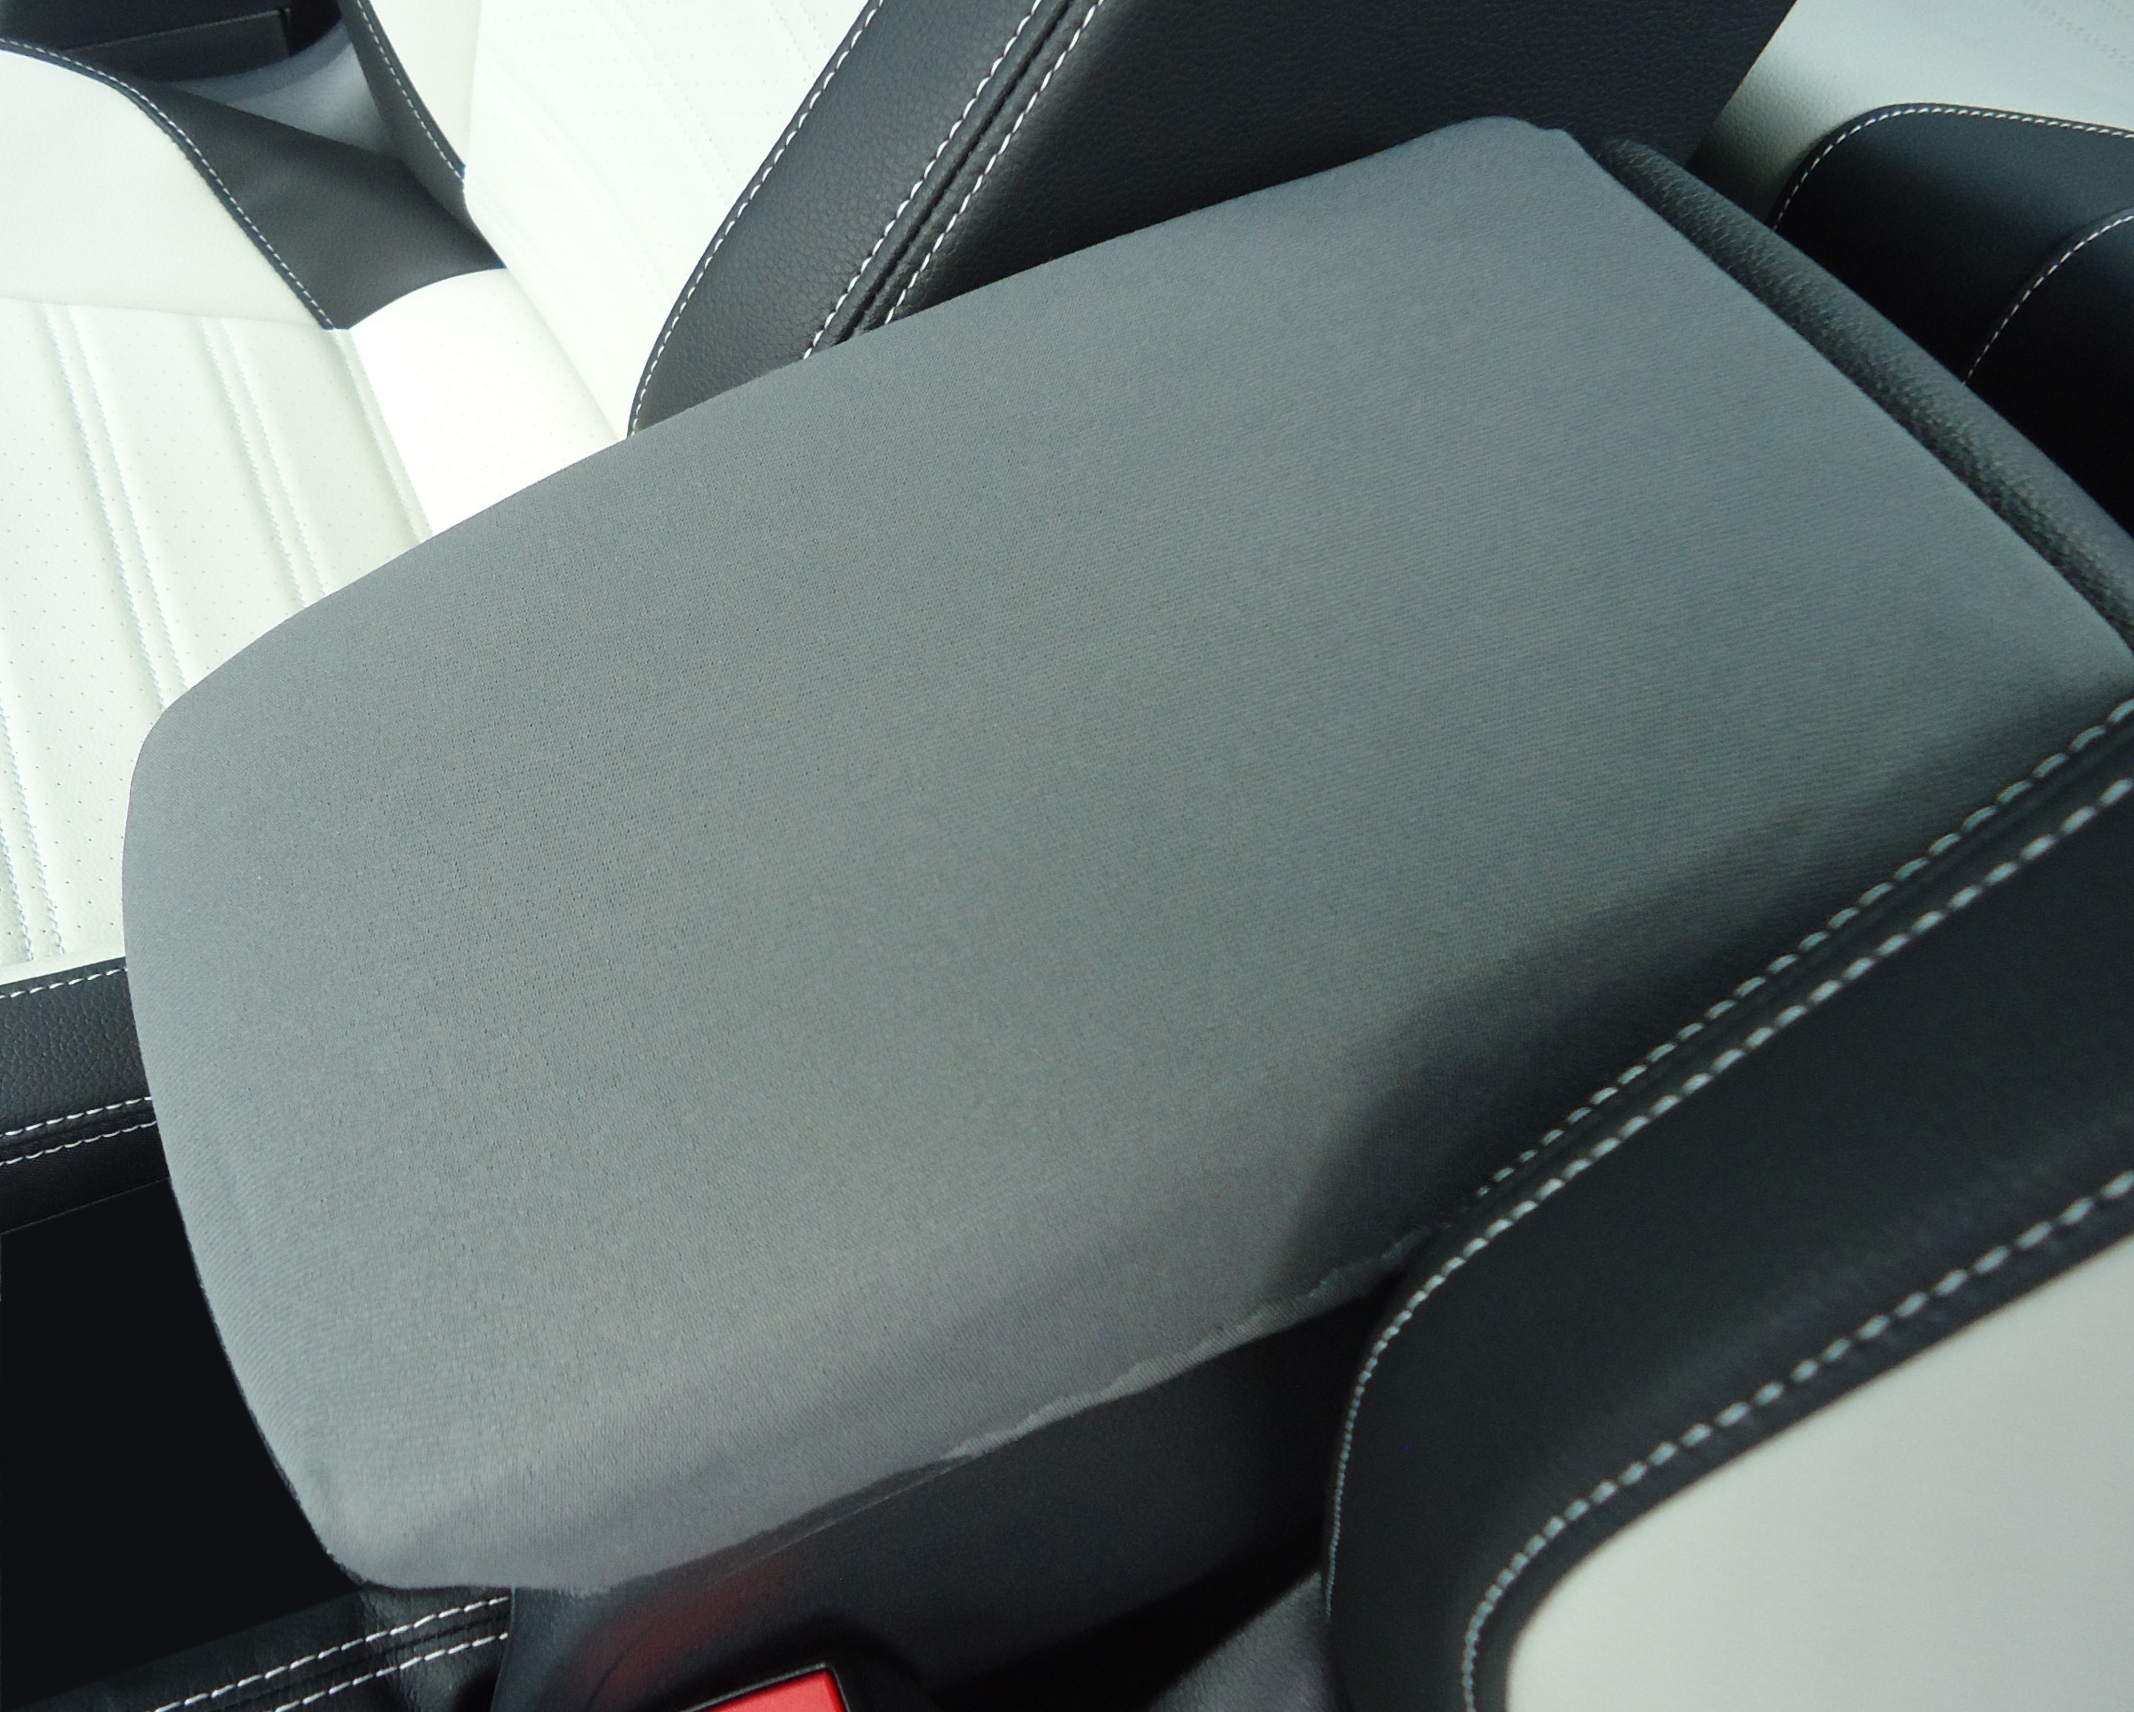 CEBAT Center Console Cover Pad Black Stitches Waterproof Anti-Scratch Leather Armrest Seat Box Protector Fit for Ford Edge 2015-2021 Car Interior Decoration Accessories 